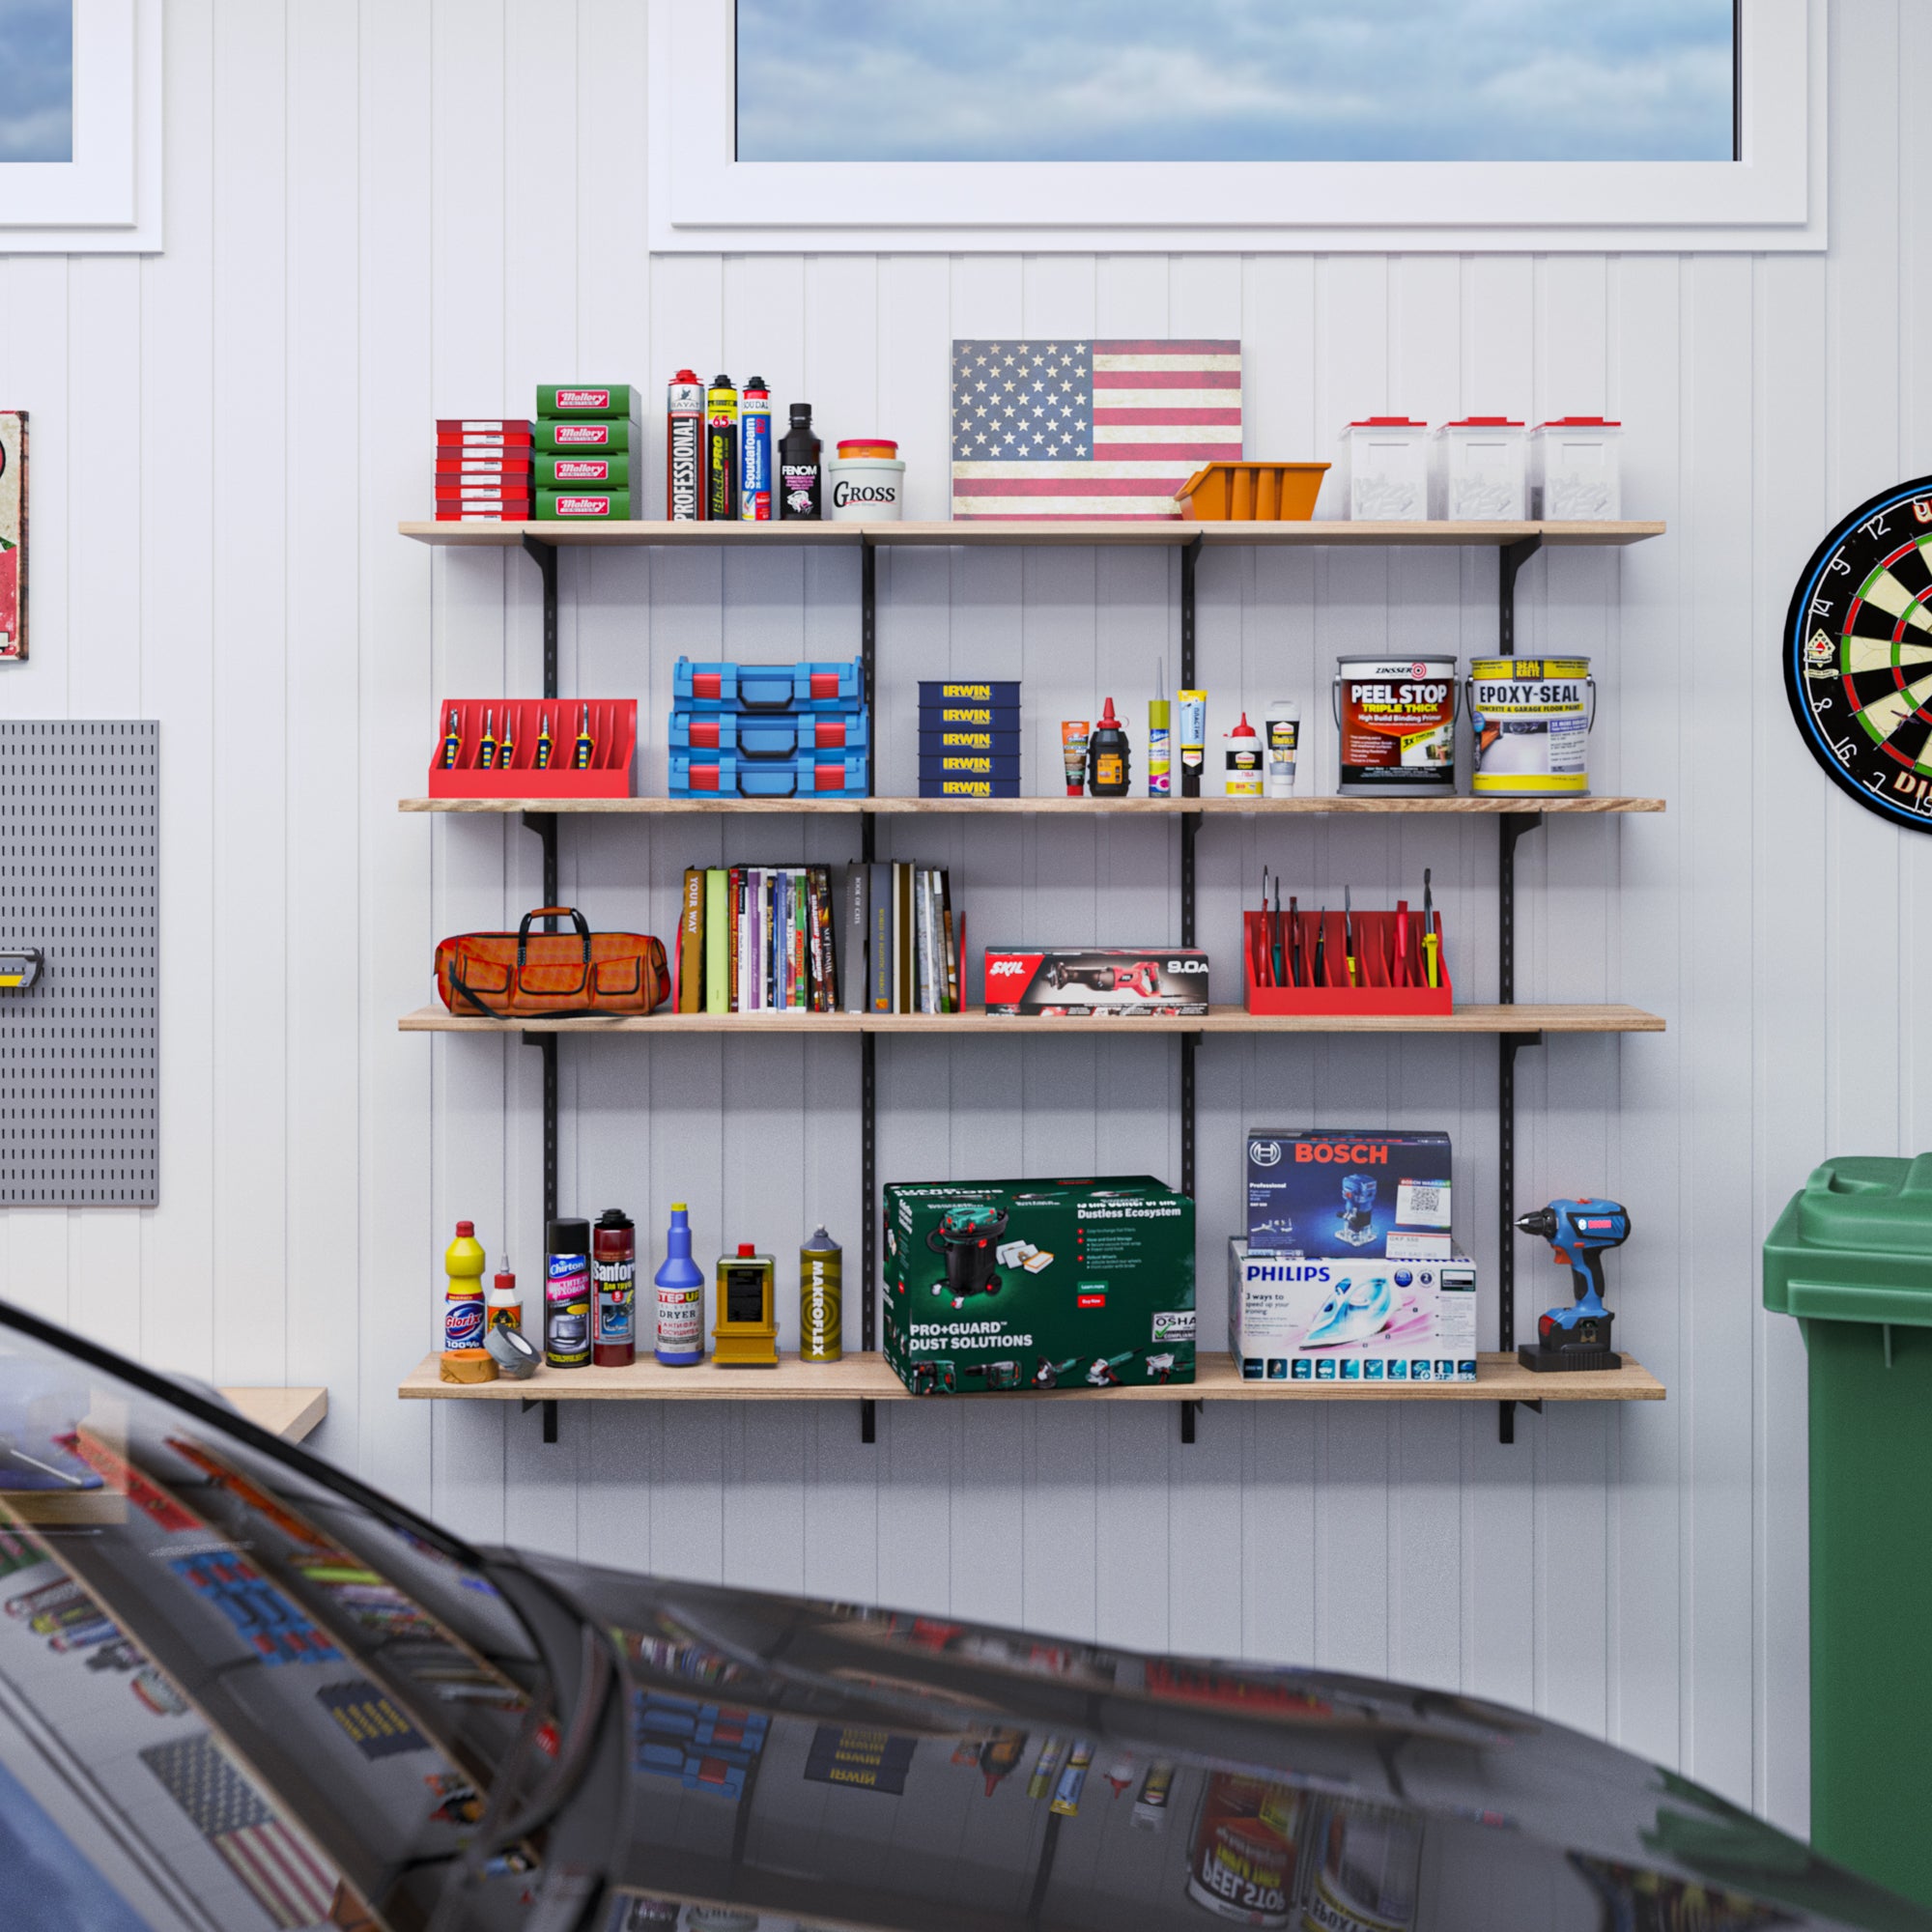 A garage wall shelf loaded with tools, automotive supplies, and storage bins, showing a highly organized and functional space for hobbies and work.